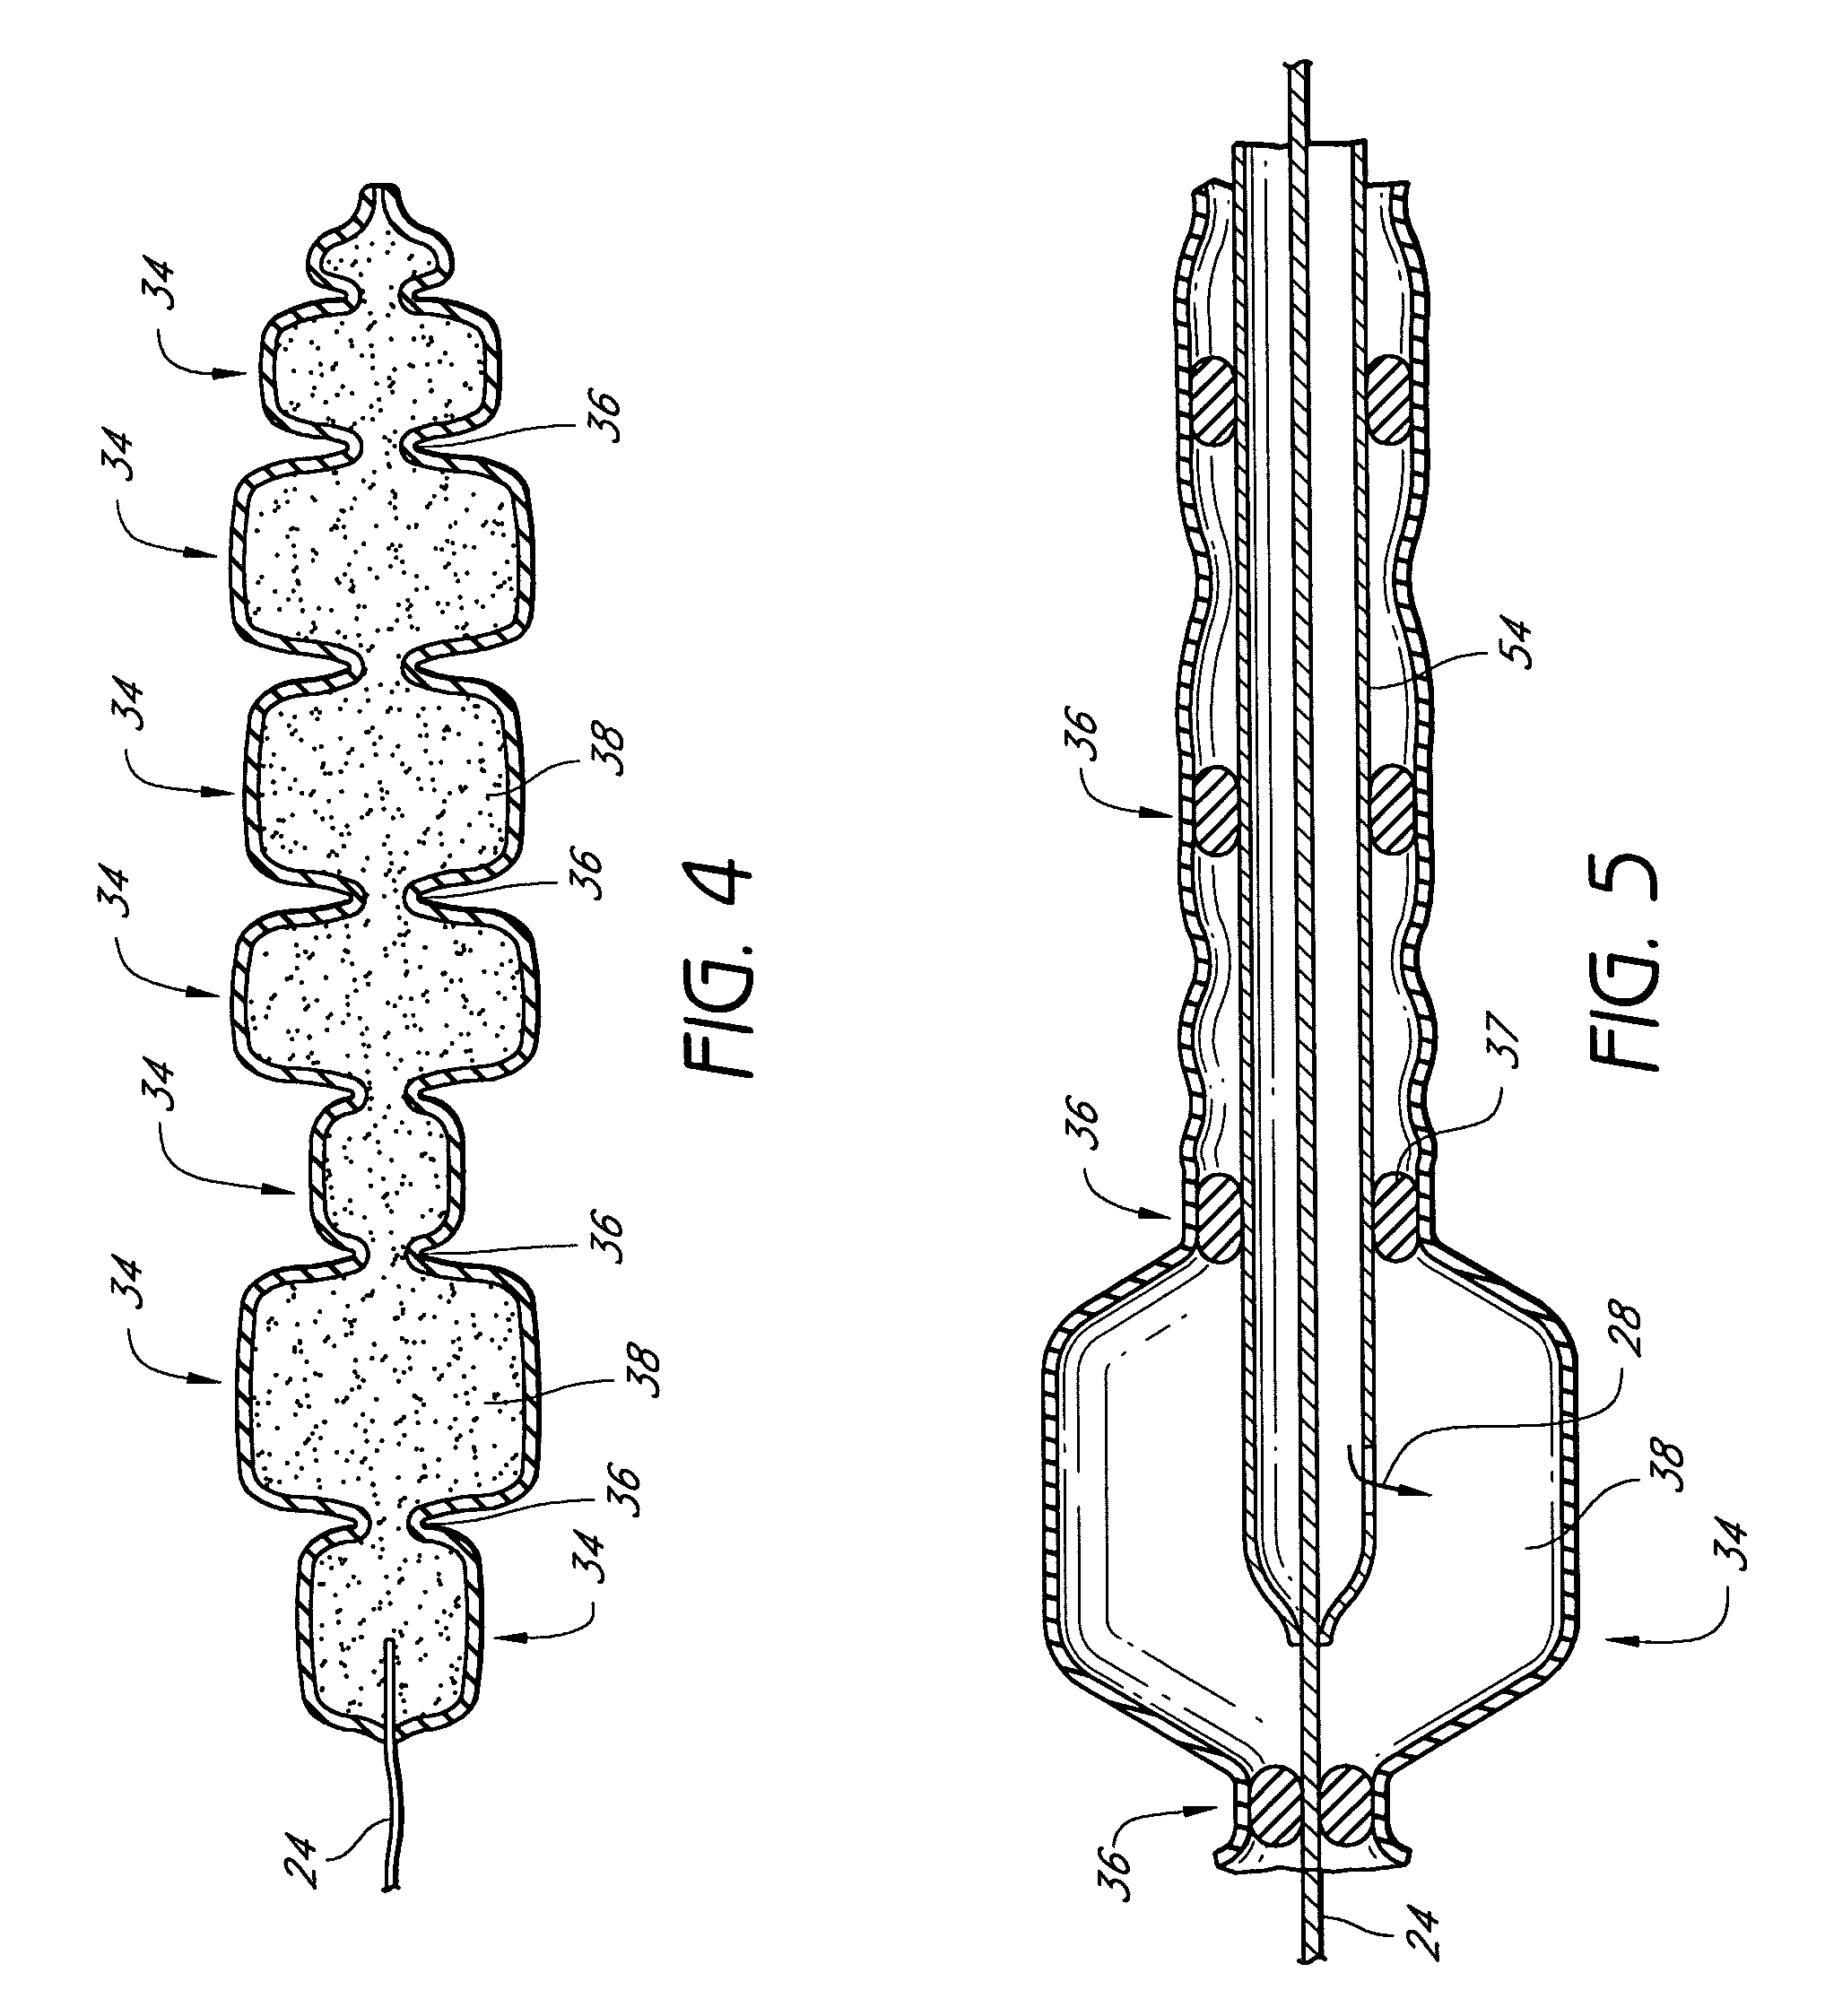 Transformable tissue bulking device